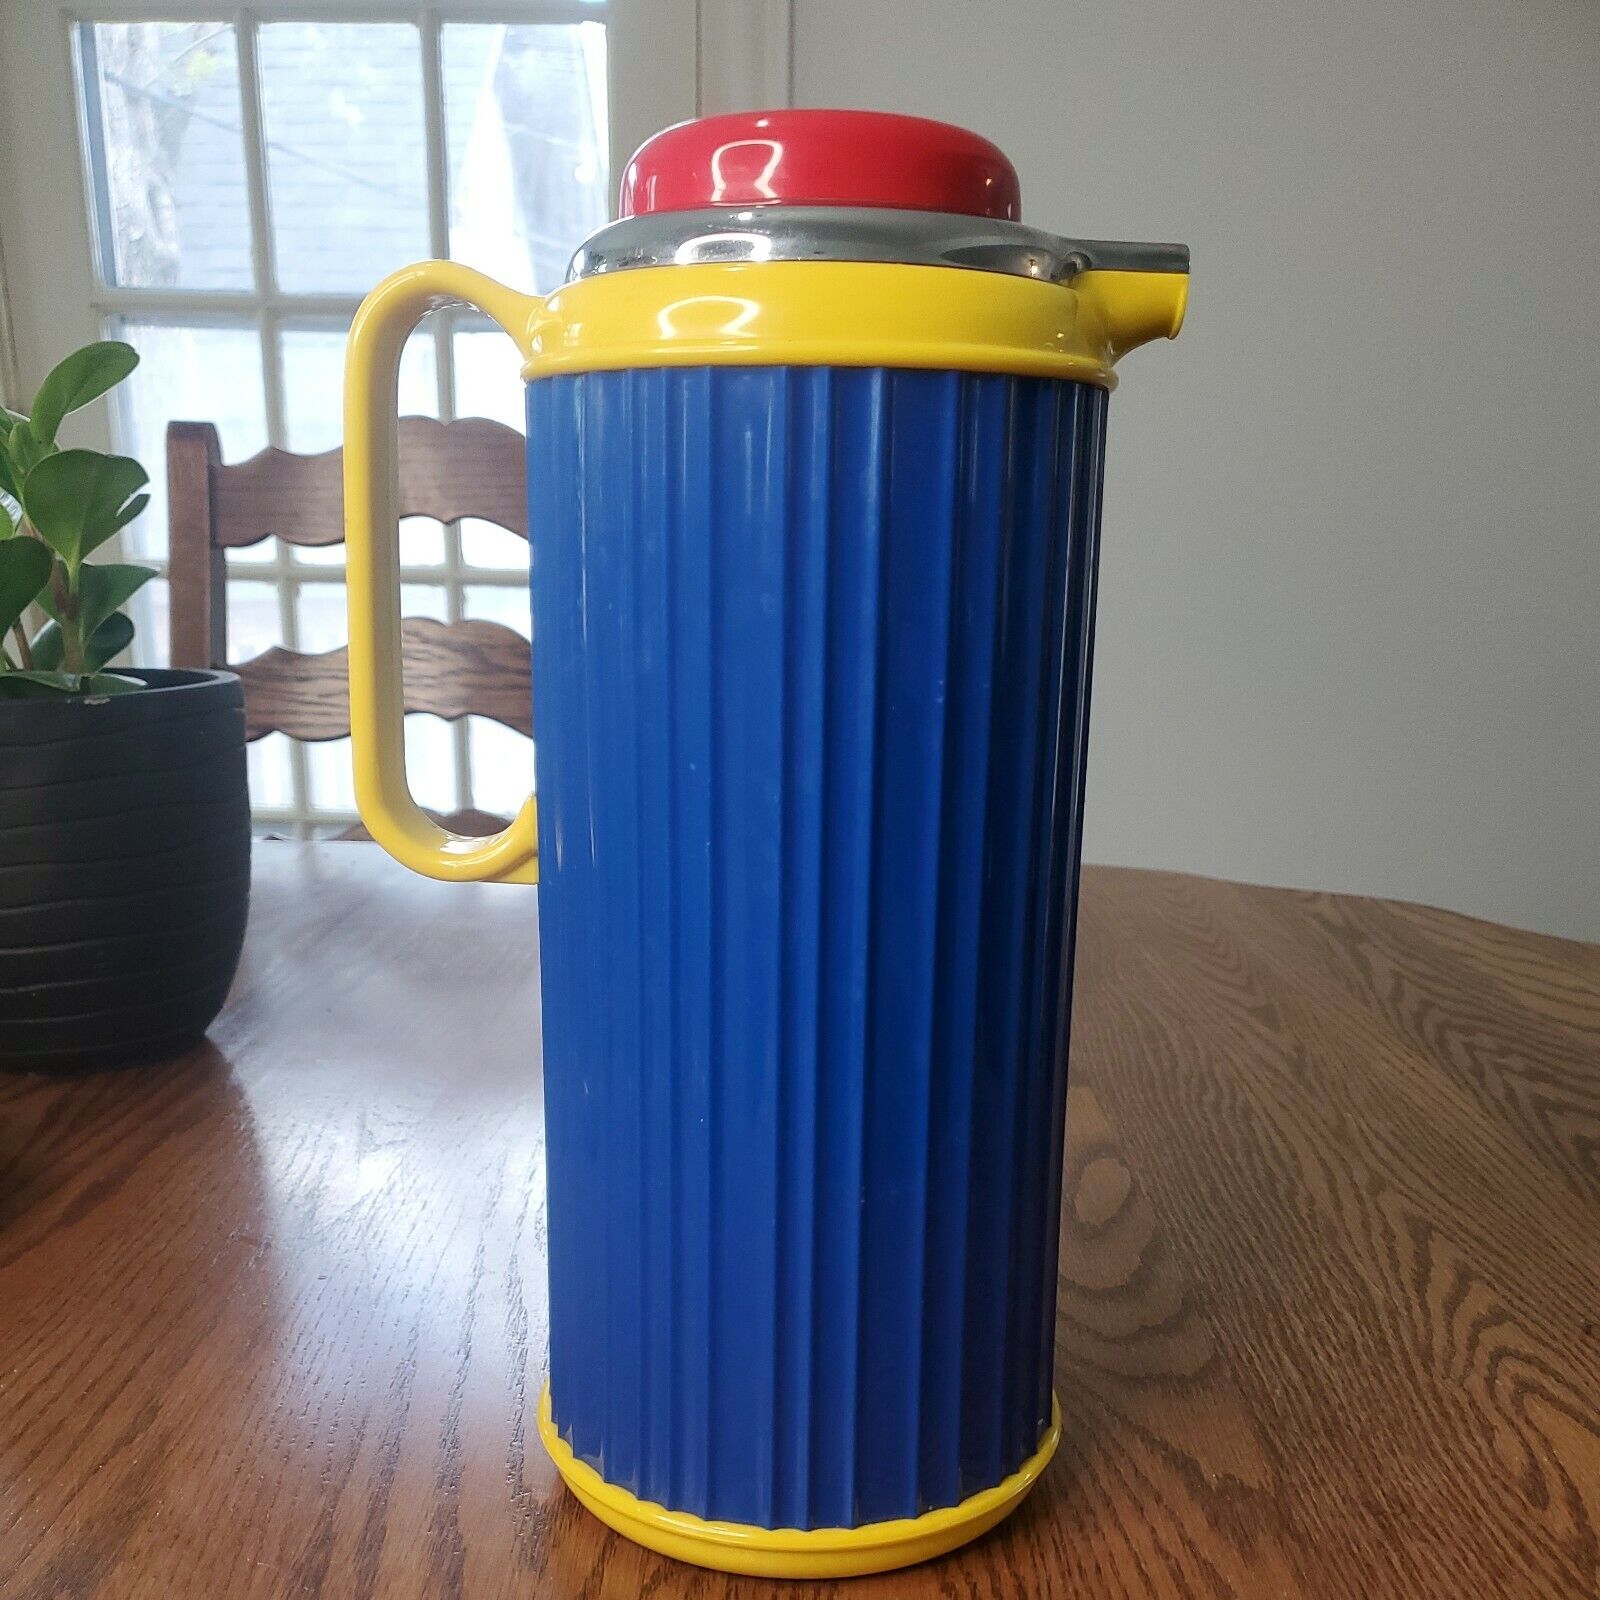 Vintage 80s Corning Thermique 1 Quart Thermal Kitchen Carafe Primary Colors mcm